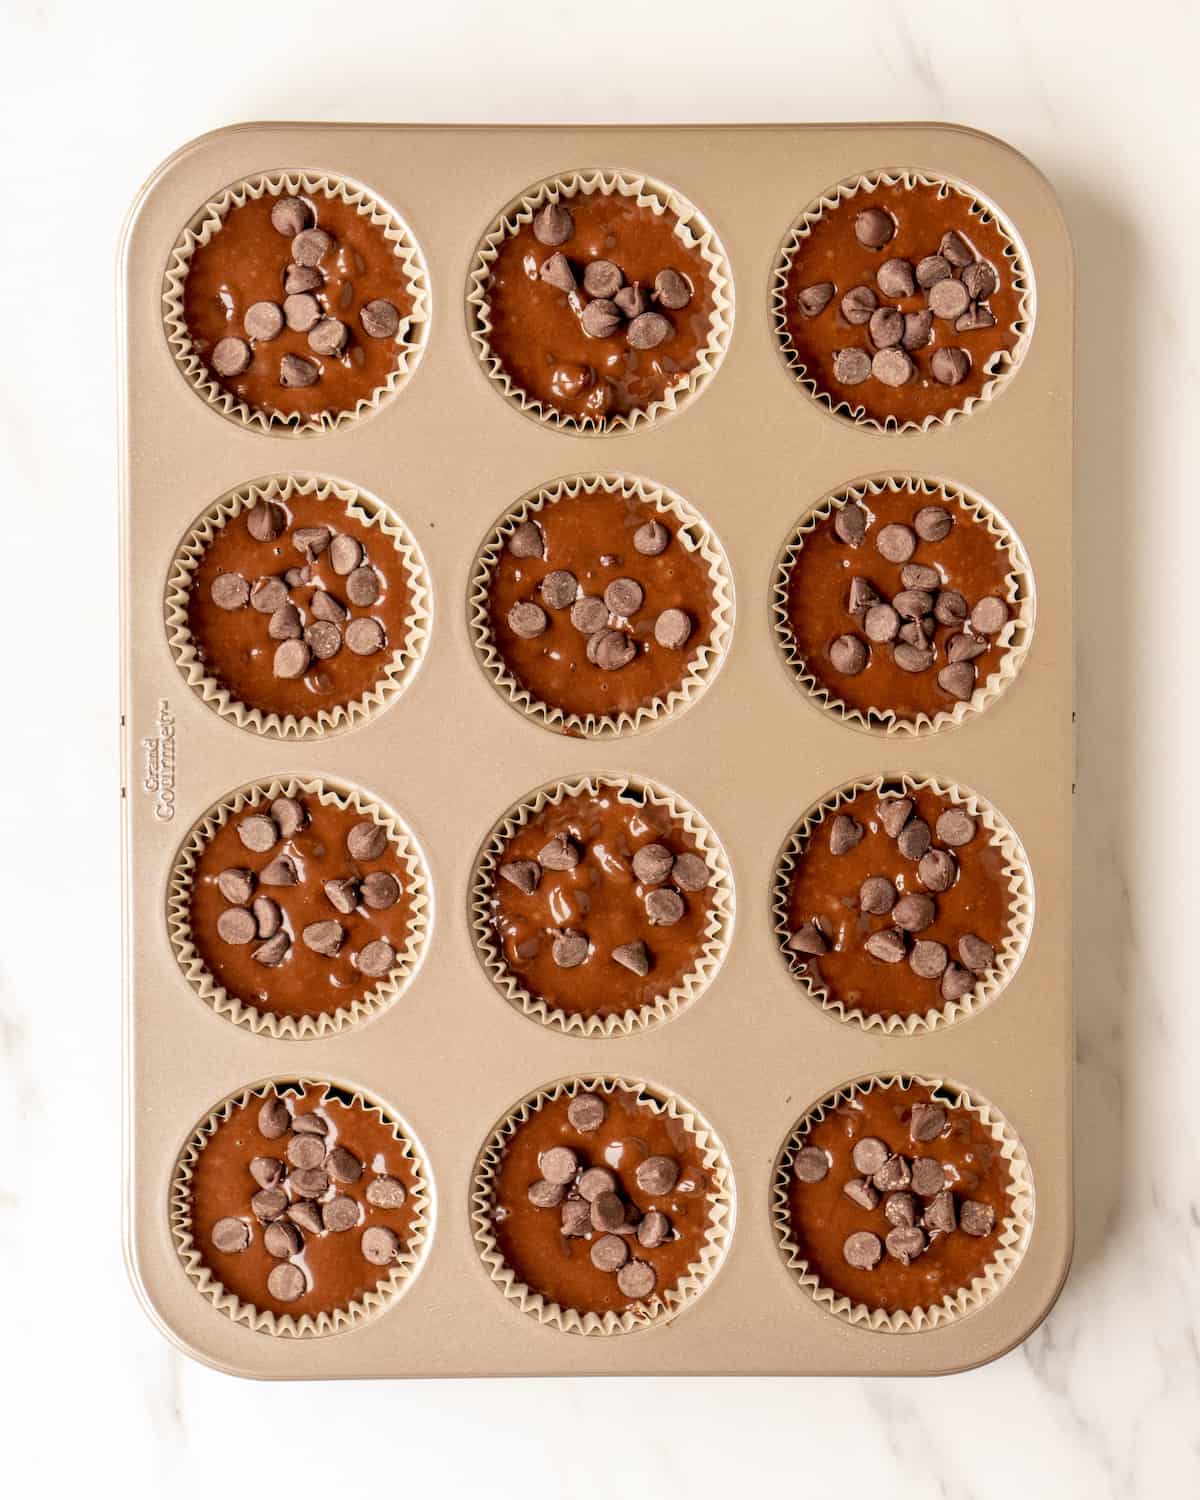 A 4x3 muffin tray lined with cupcake liners, filled with double chocolate chip muffins batter and topped with chocolate chips.